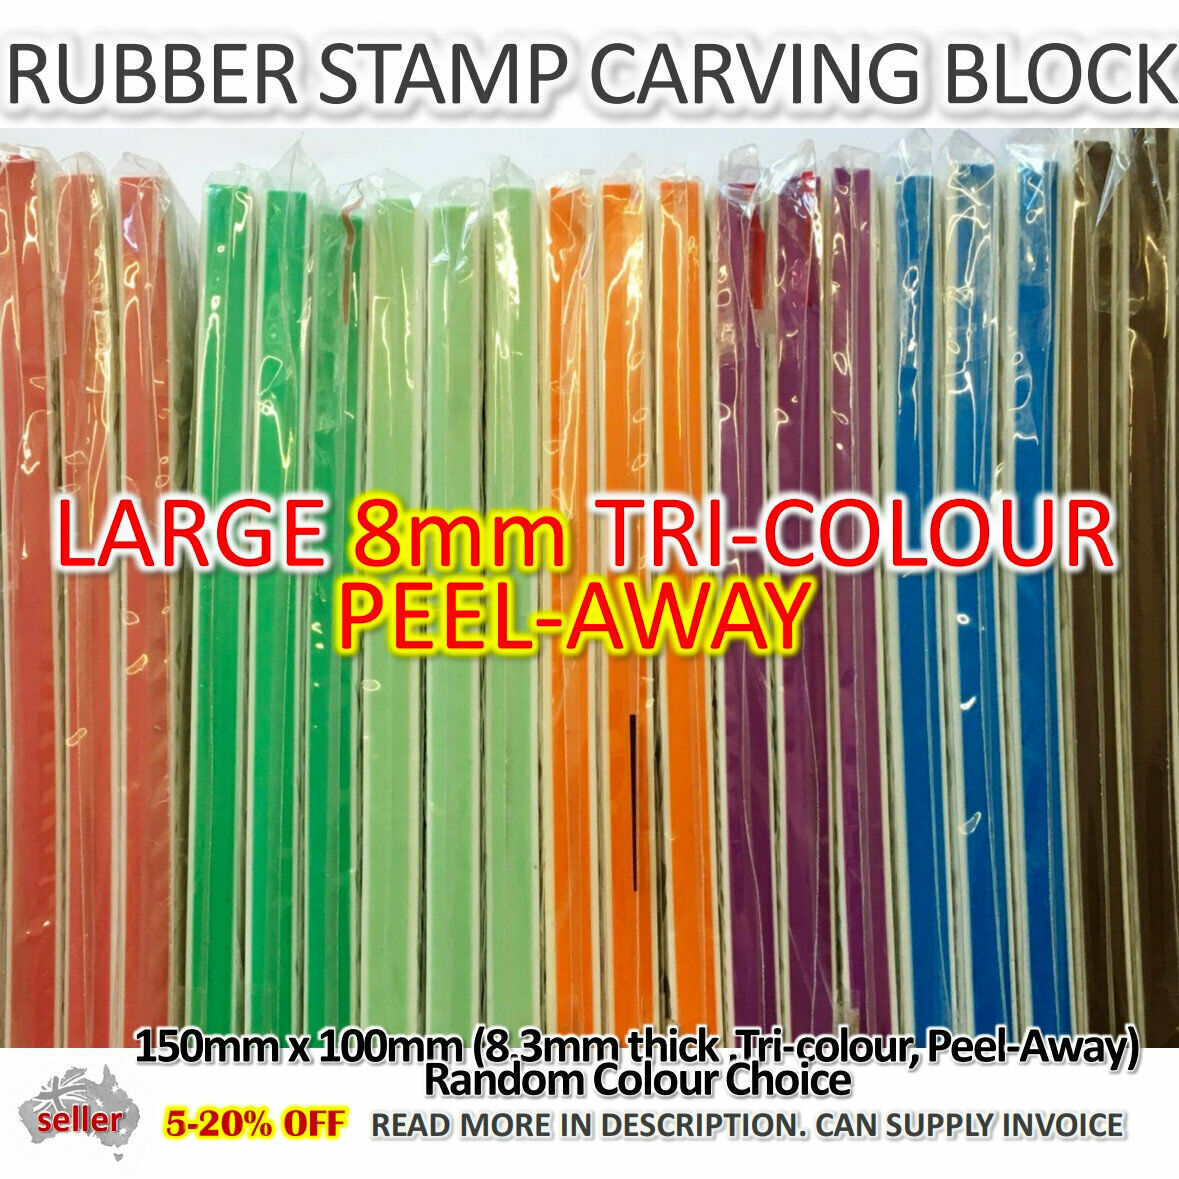 Ink Pads for Rubber Stamps, Rubber Stamps Pads- New Zealand